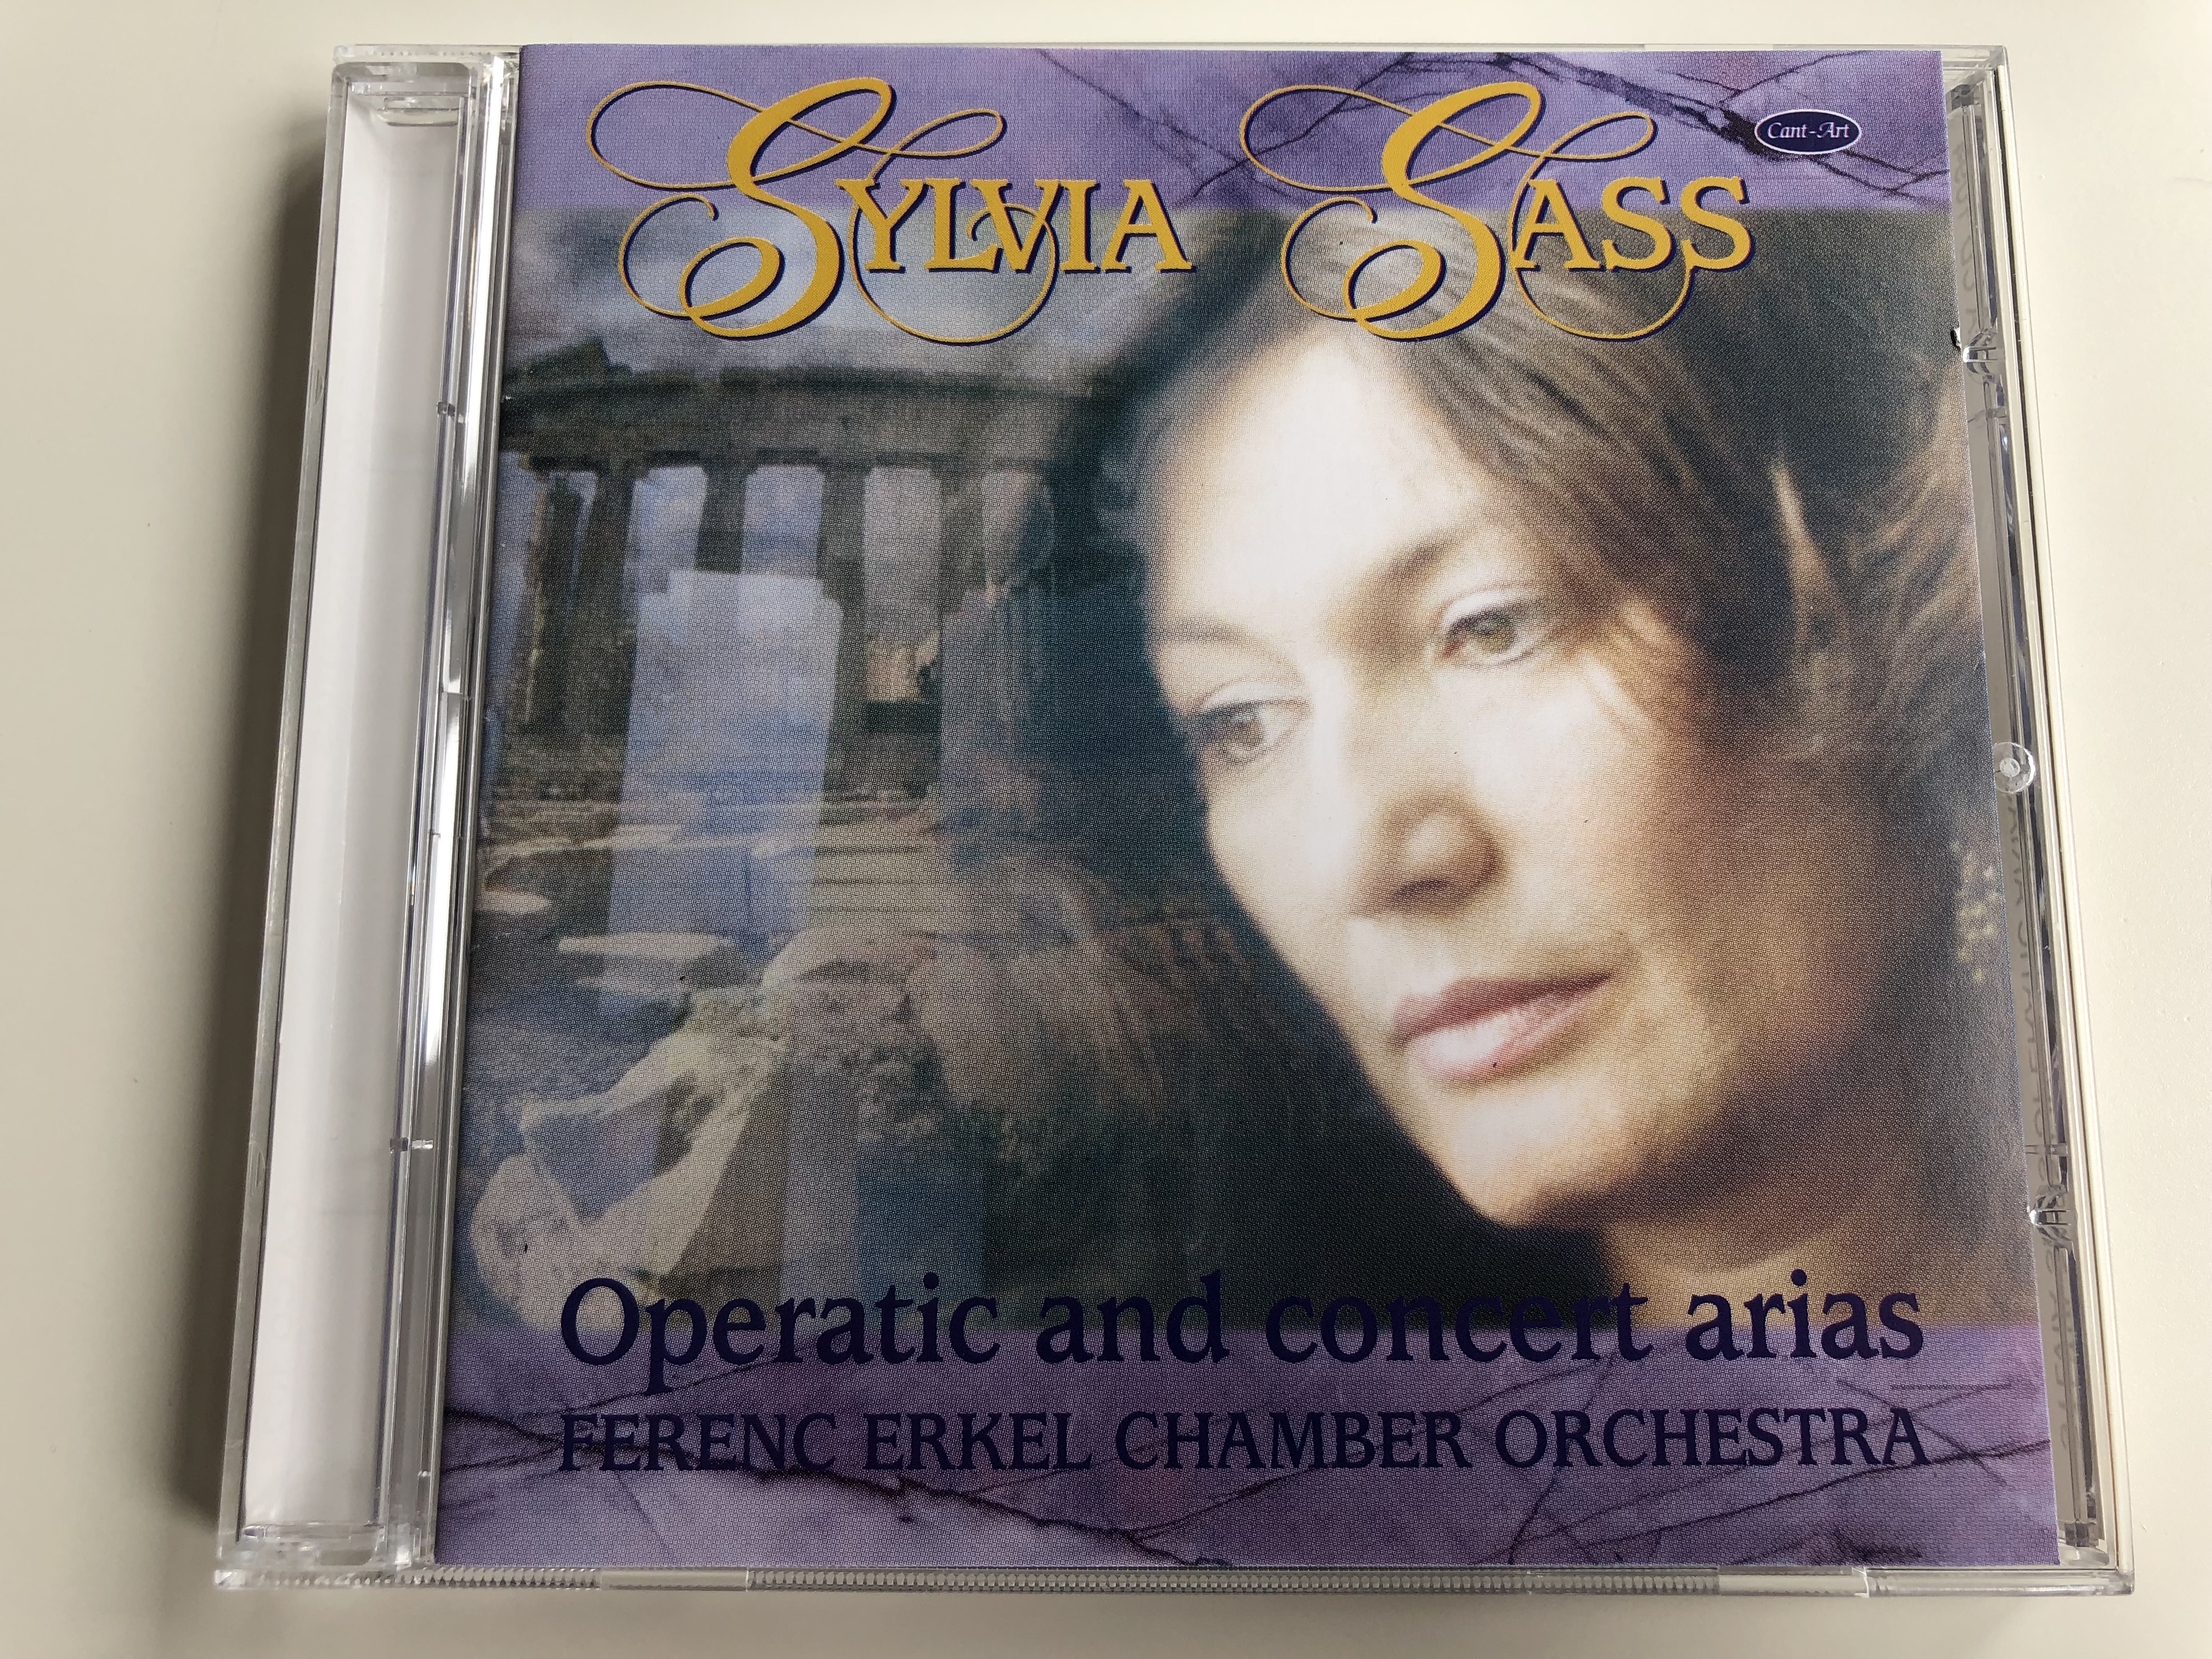 sylvia-sass-operatic-and-concert-arias-ferenc-erkel-chamber-orchestra-cant-art-audio-cd-1994-ca-cd-1094-1-.jpg